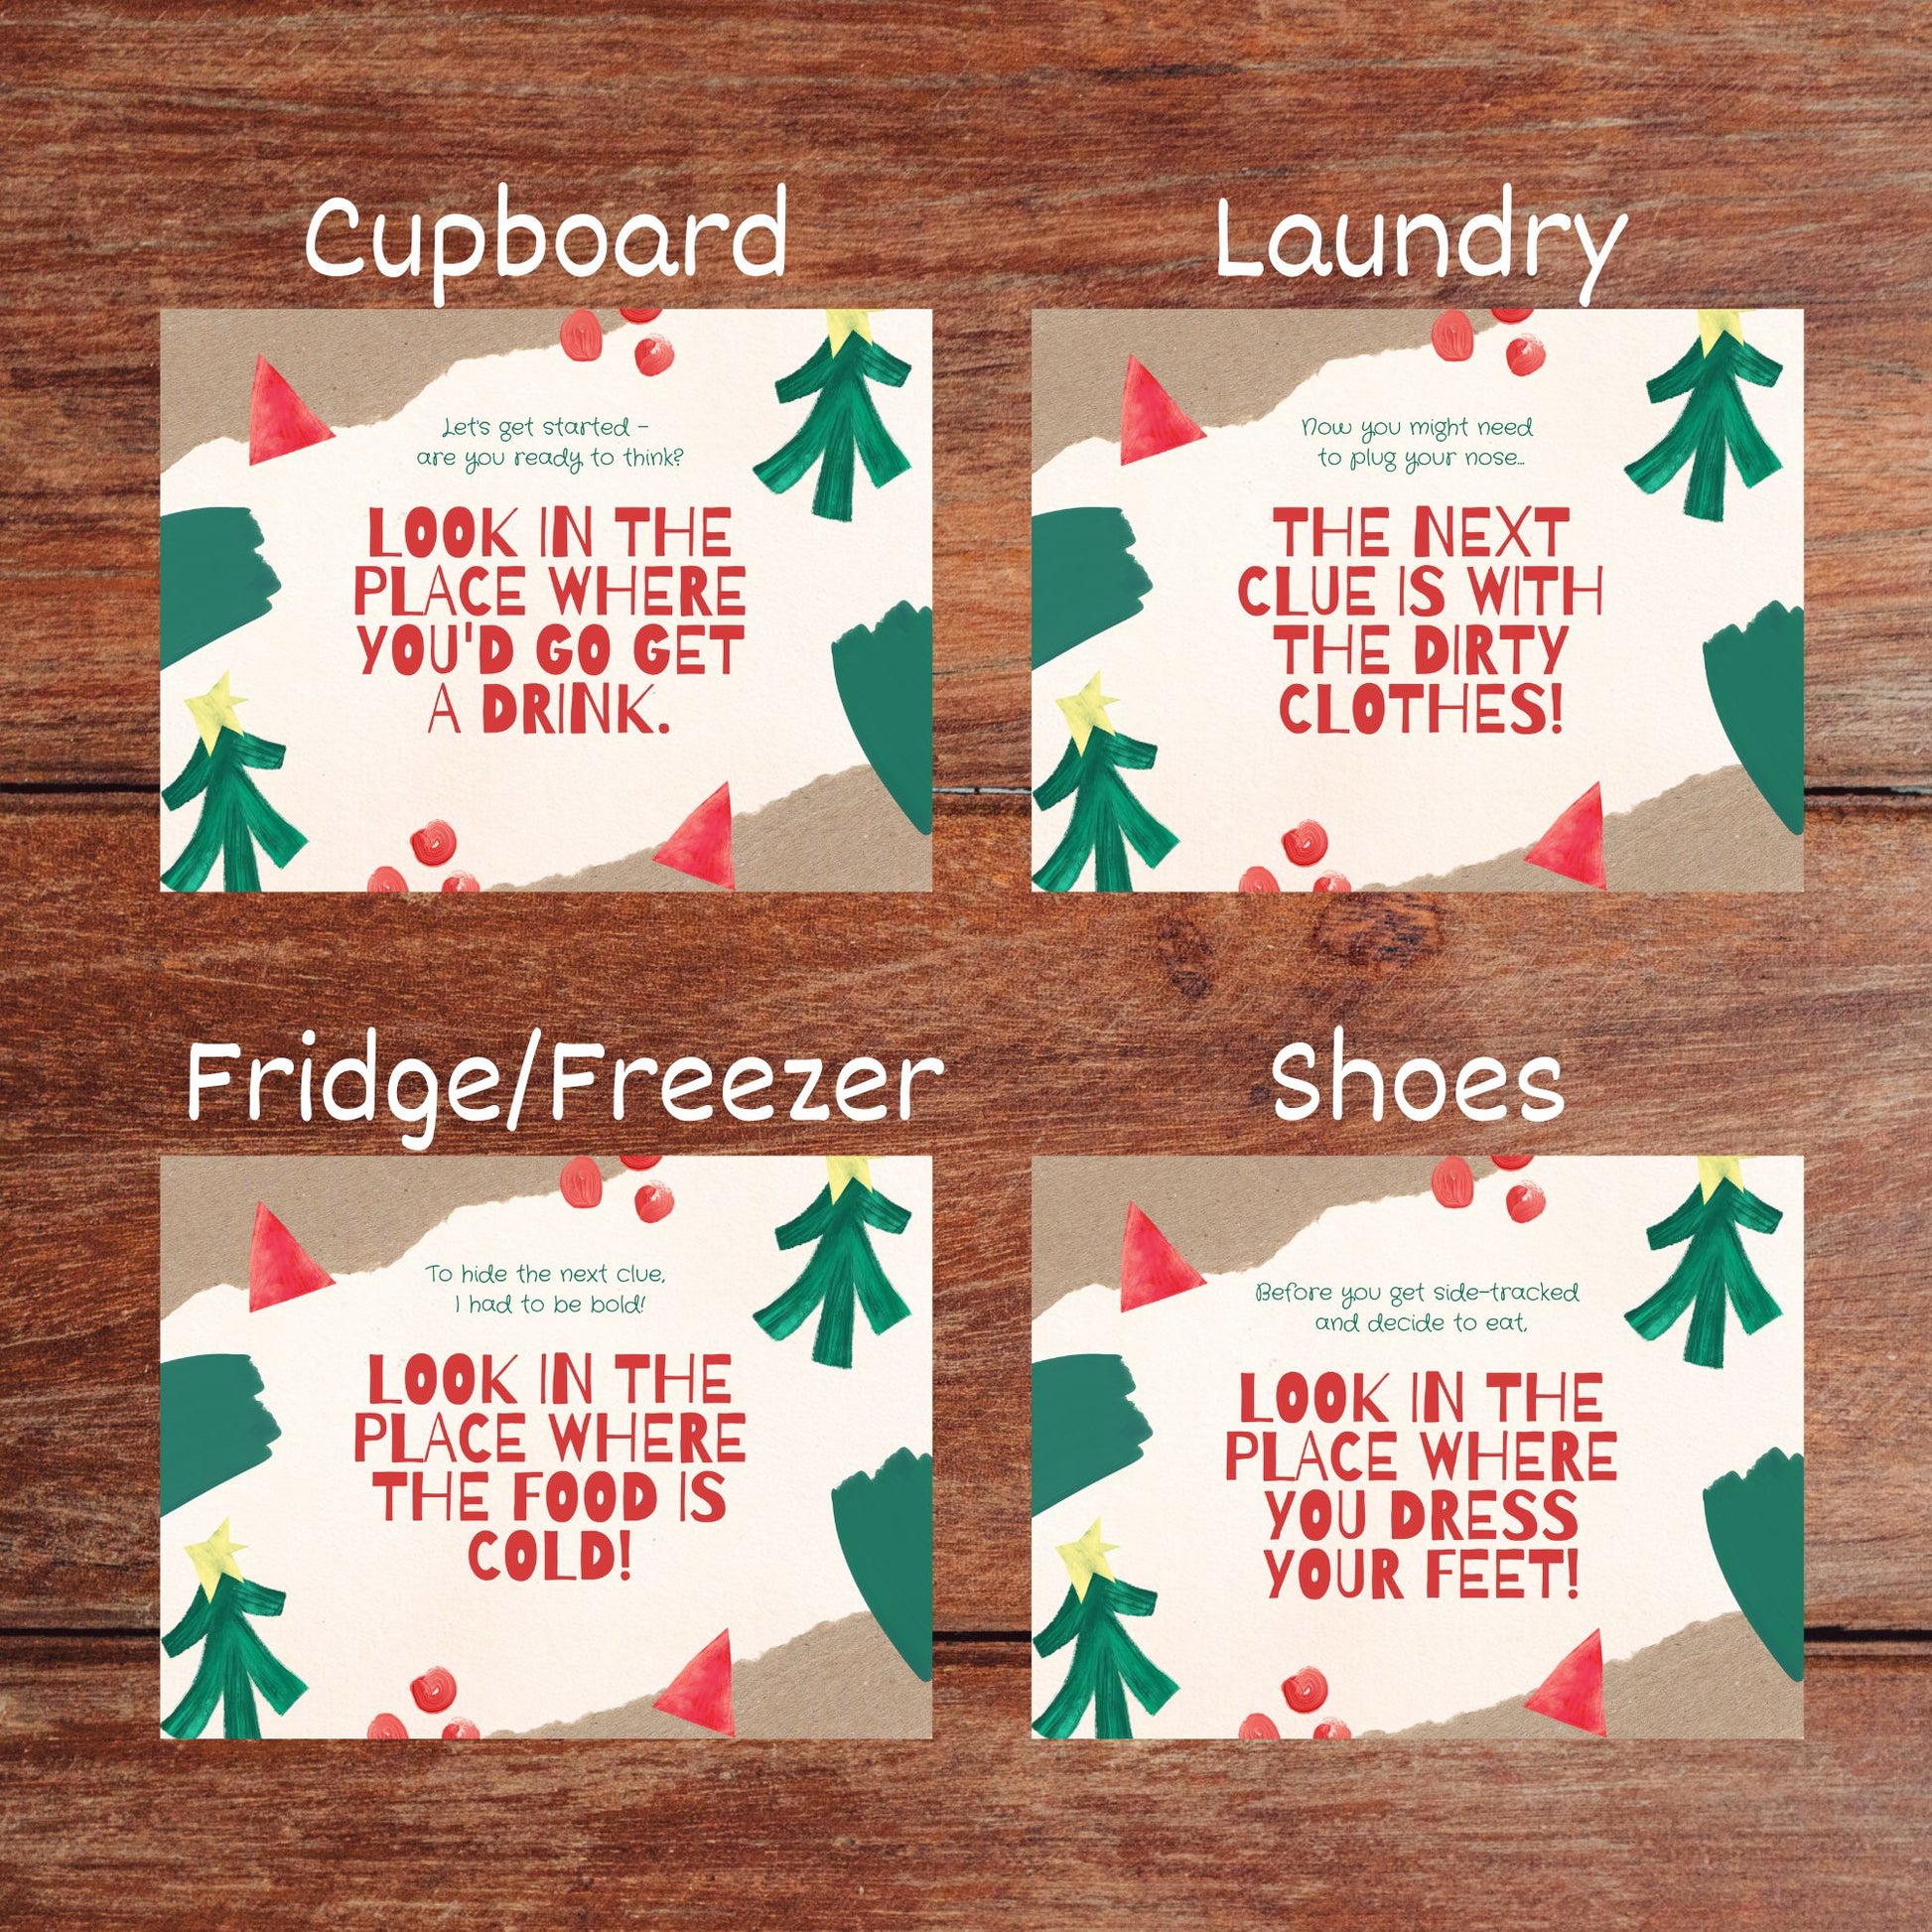 Four clue cards and their locations are displayed (cupboard, laundry, fridge/freezer, shoes)